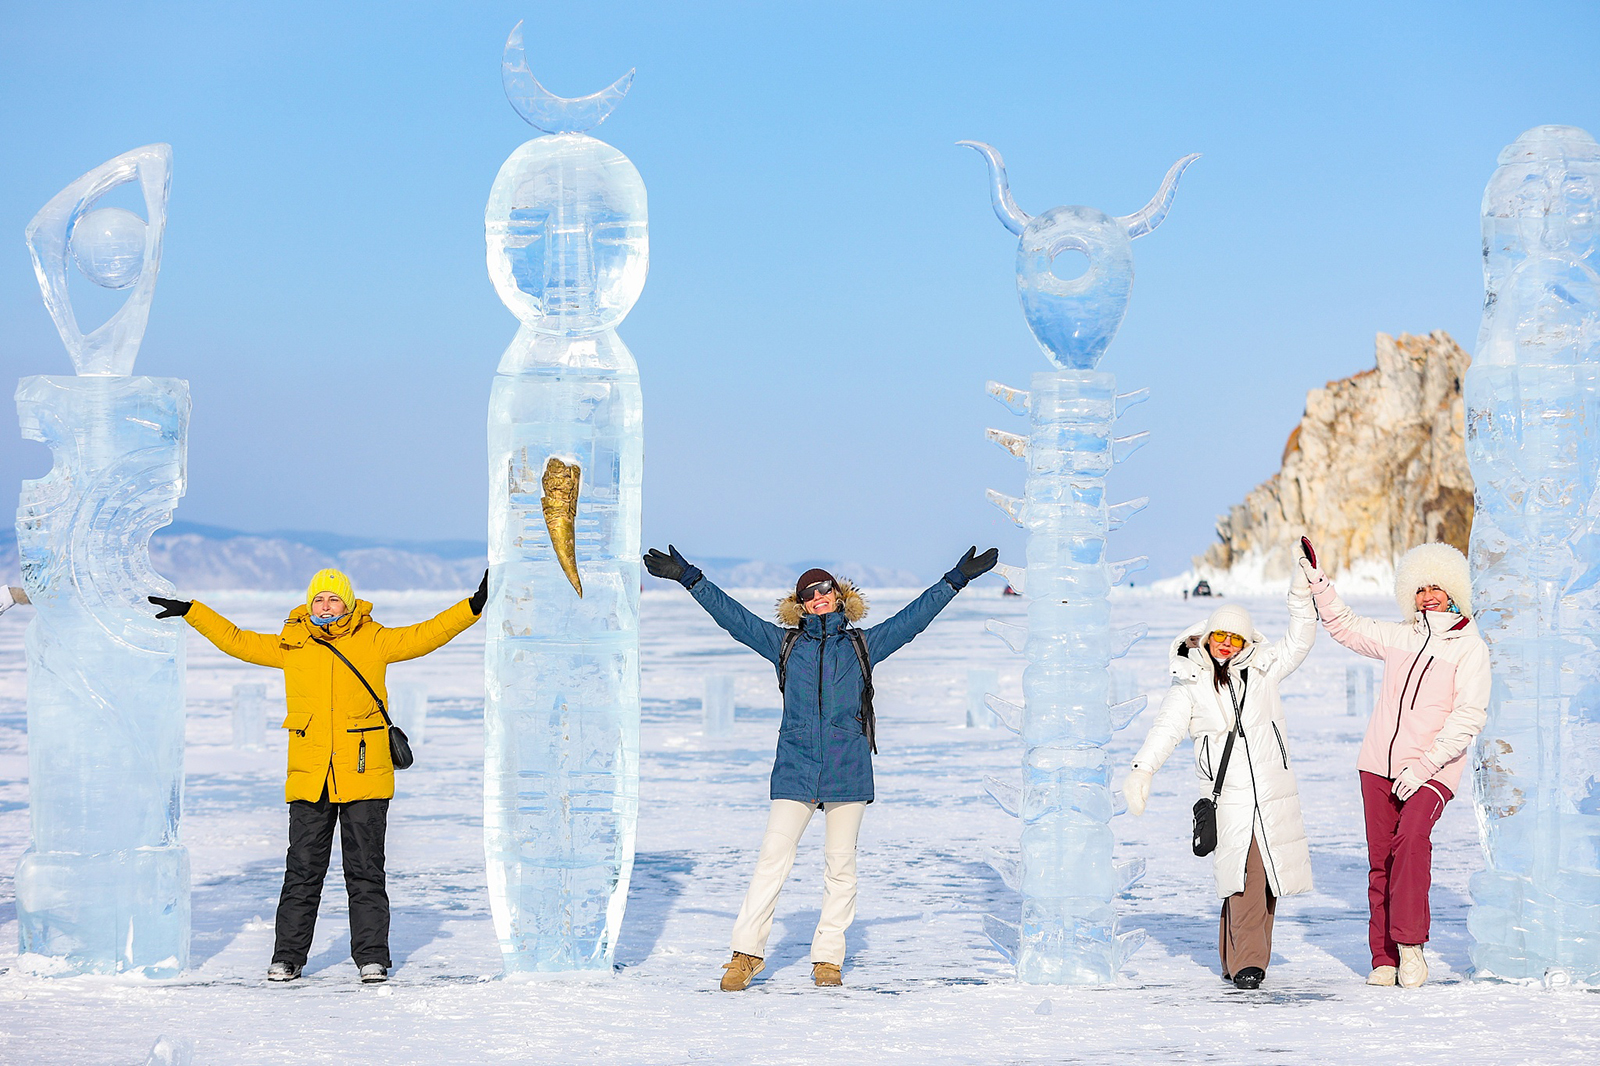 Visitors pose for photos with ice sculptures during the Olkhon Ice Fest on the shores of Lake Baikal's Olkhon Island in Russia on February 17, 2024. /CFP